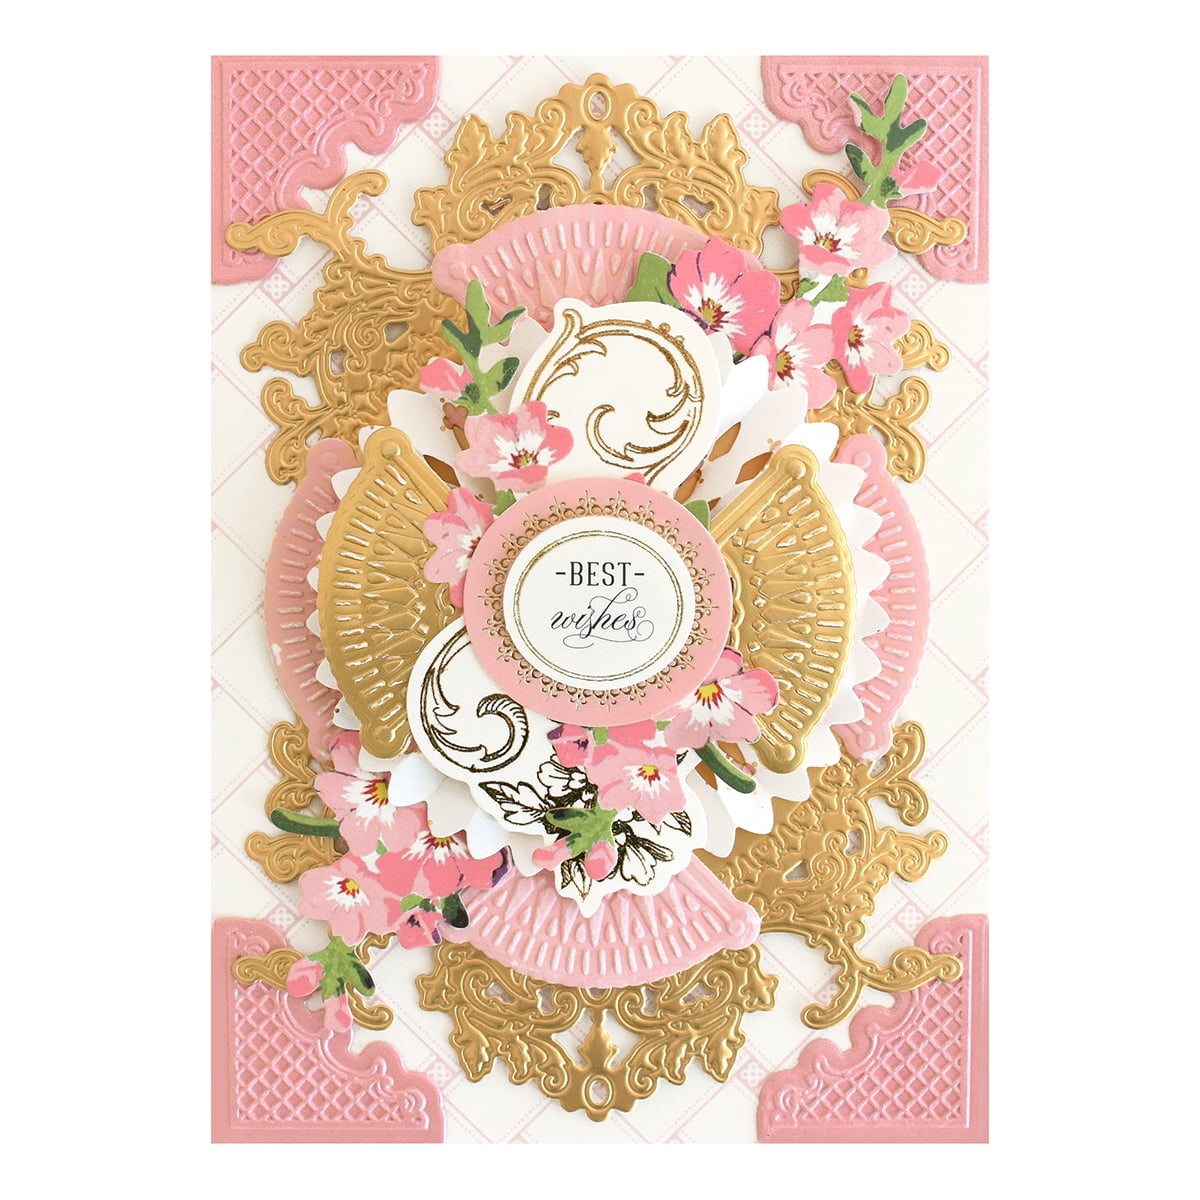 a pink and gold card with flowers on it.